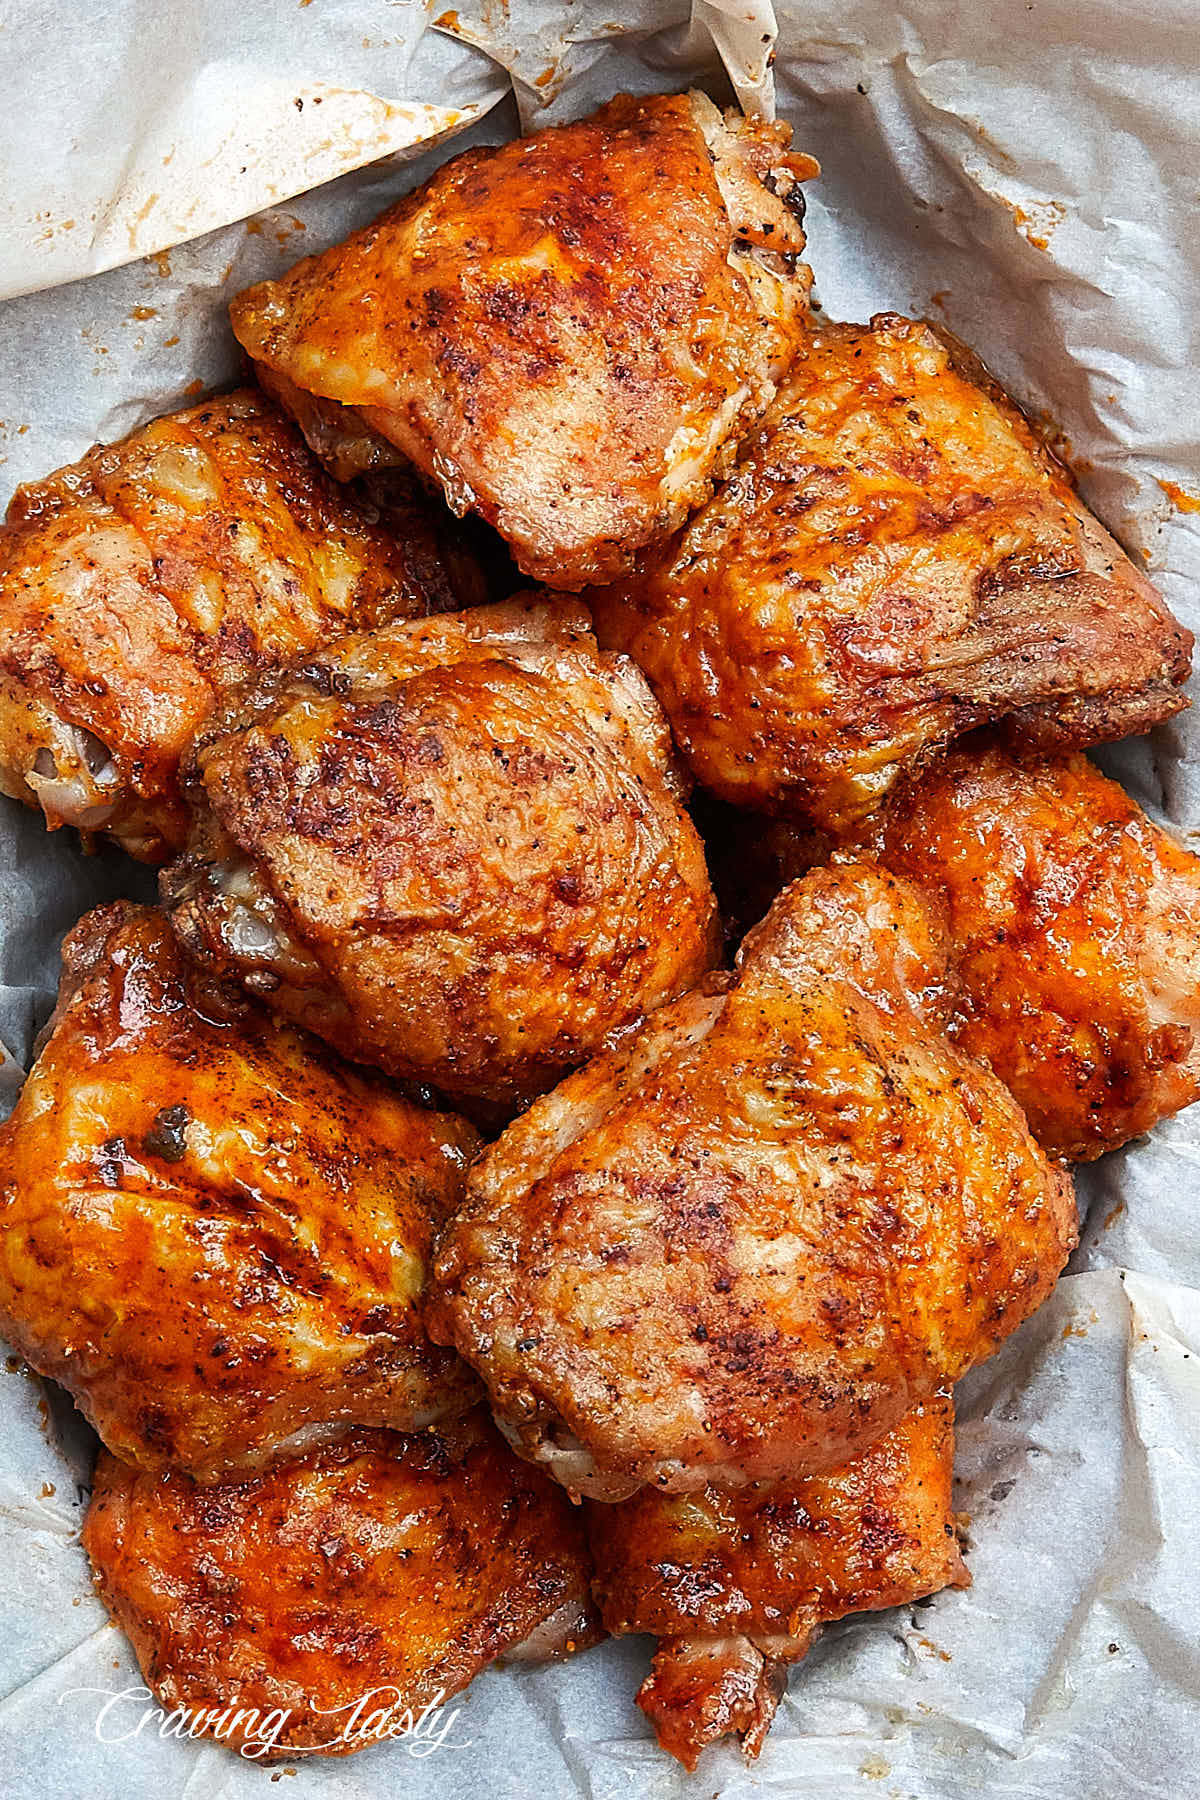 Extra Crispy Oven Fried Chicken Thighs Craving Tasty,Picture Of A Rat Tail Haircut